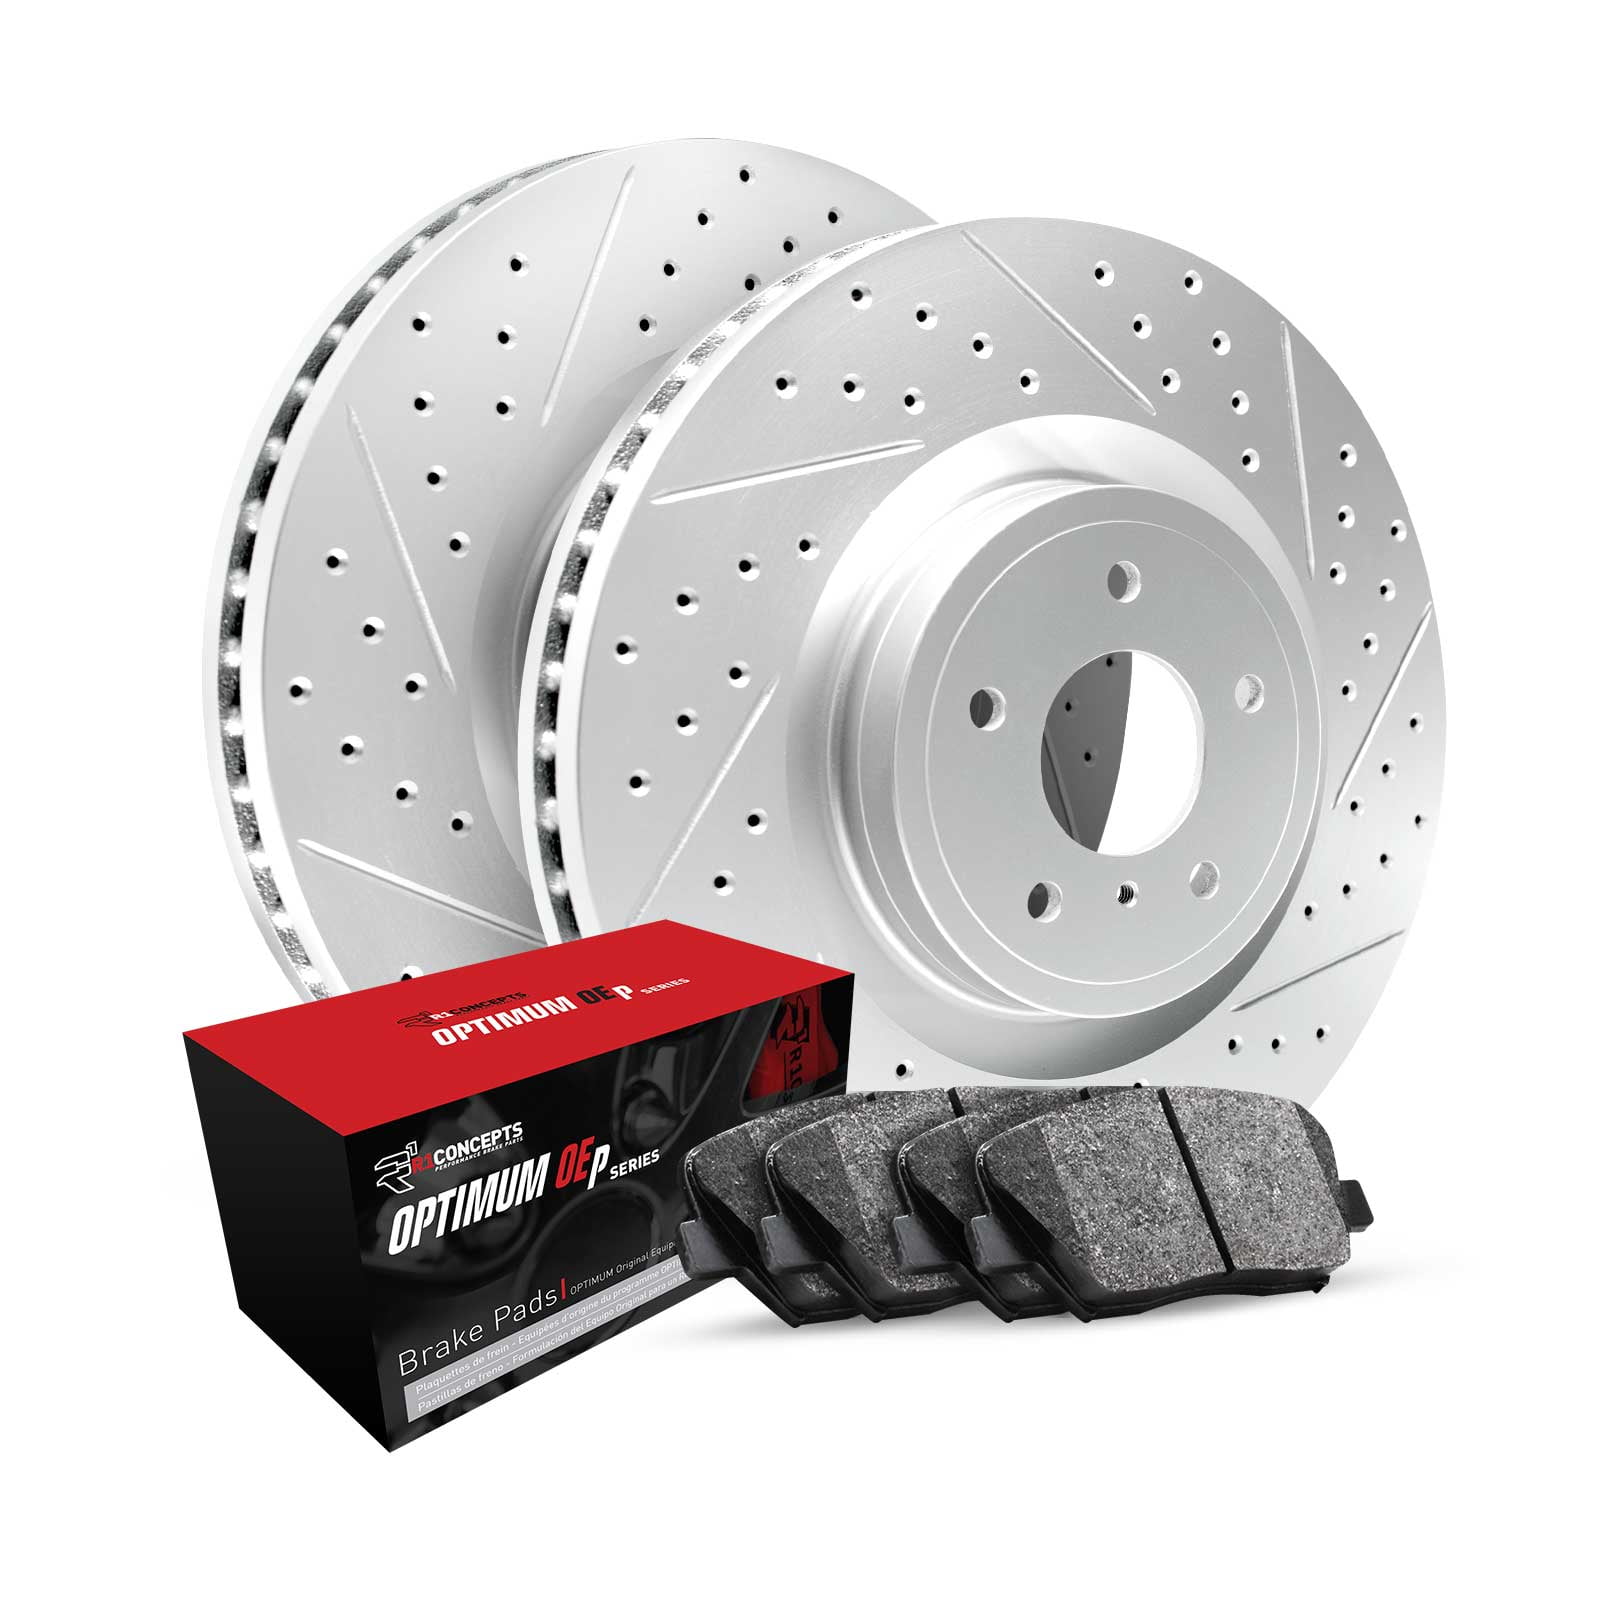 R1 Concepts Front Brakes and Rotors Kit |Front Brake Pads| Brake Rotors and  Pads| Optimum OEp Brake Pads and Rotors|fits 2008-2012 Jeep Wrangler -  